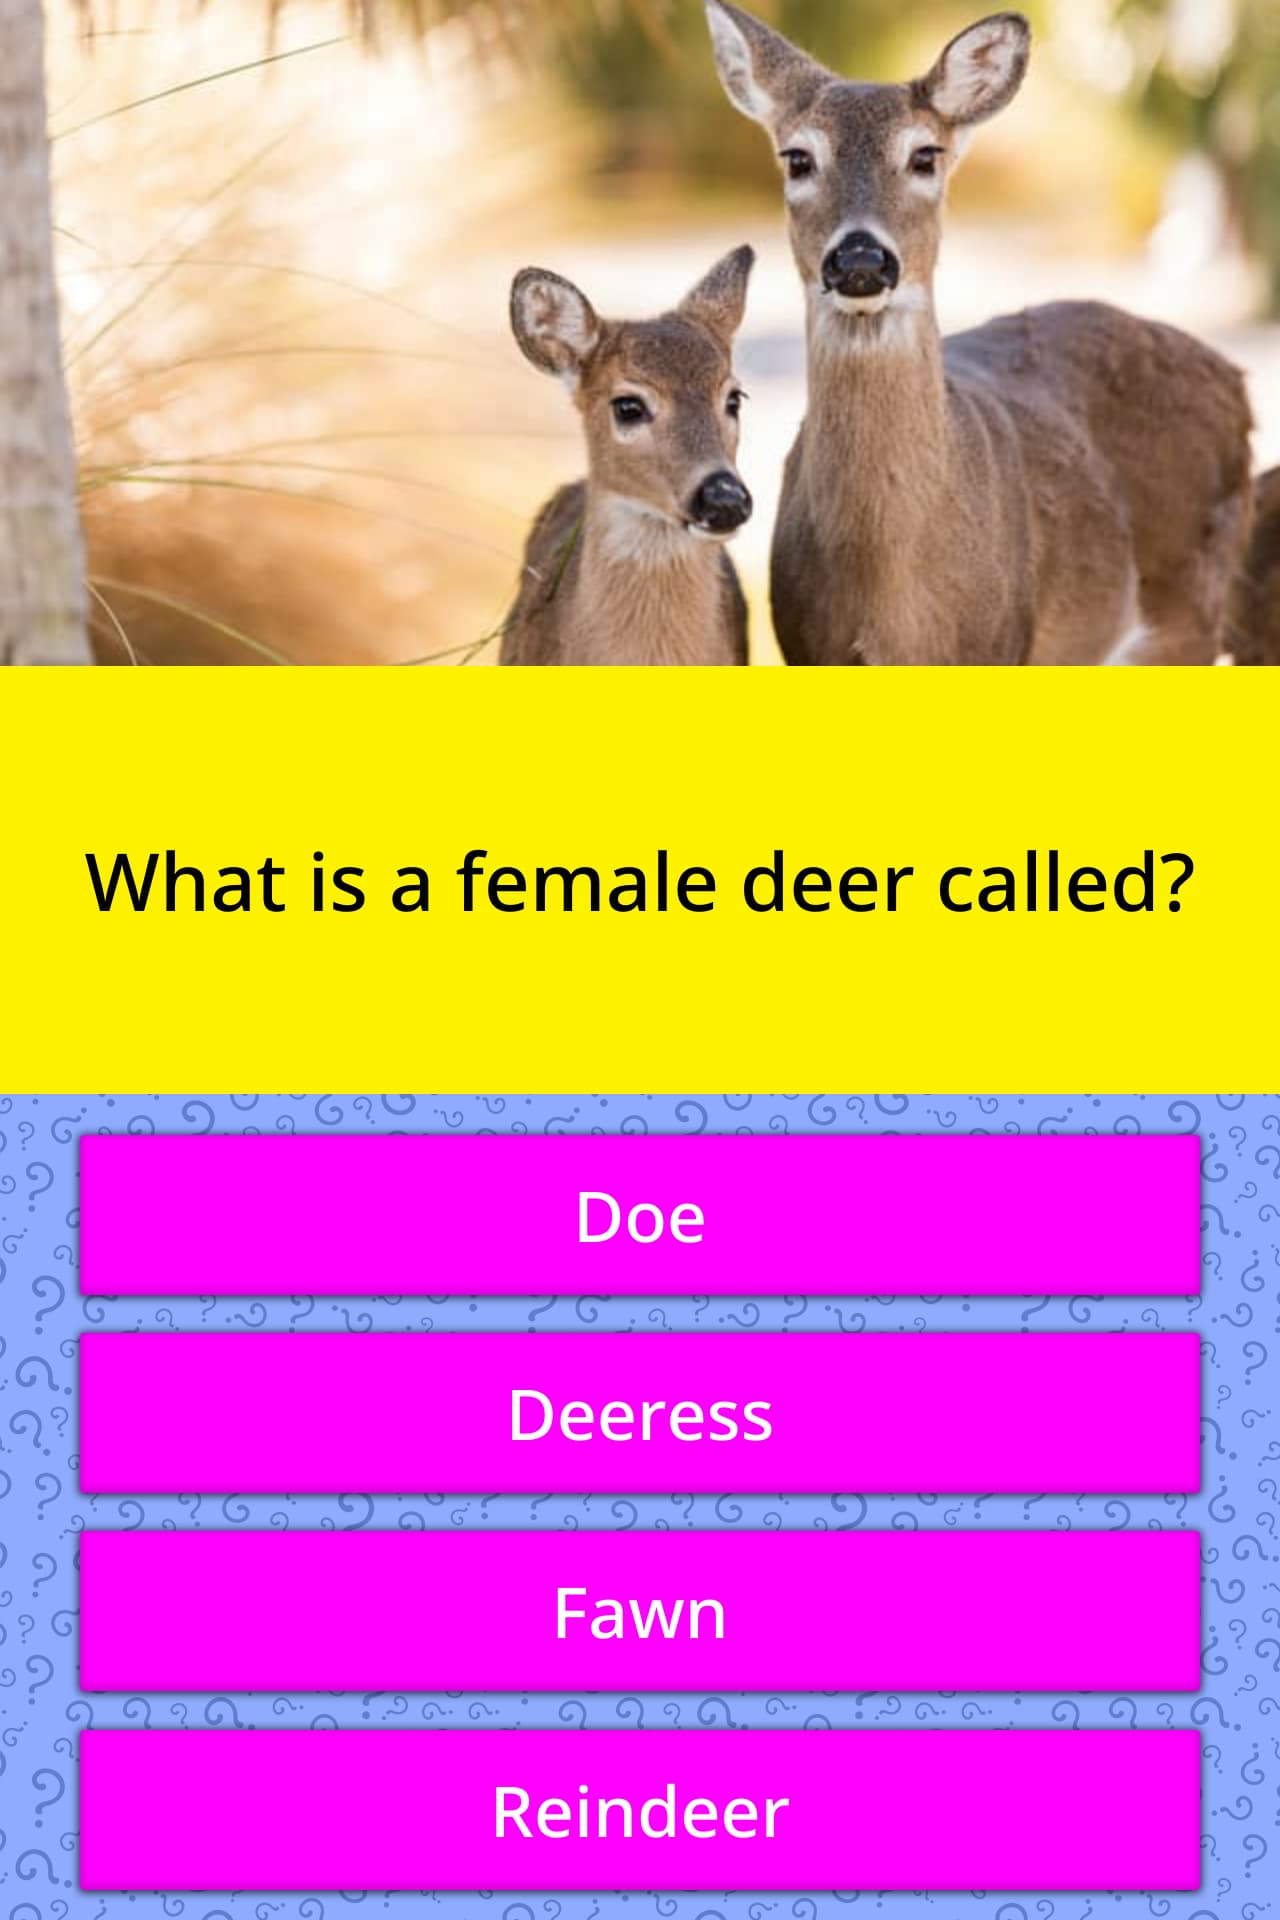 What is a female deer called in English?